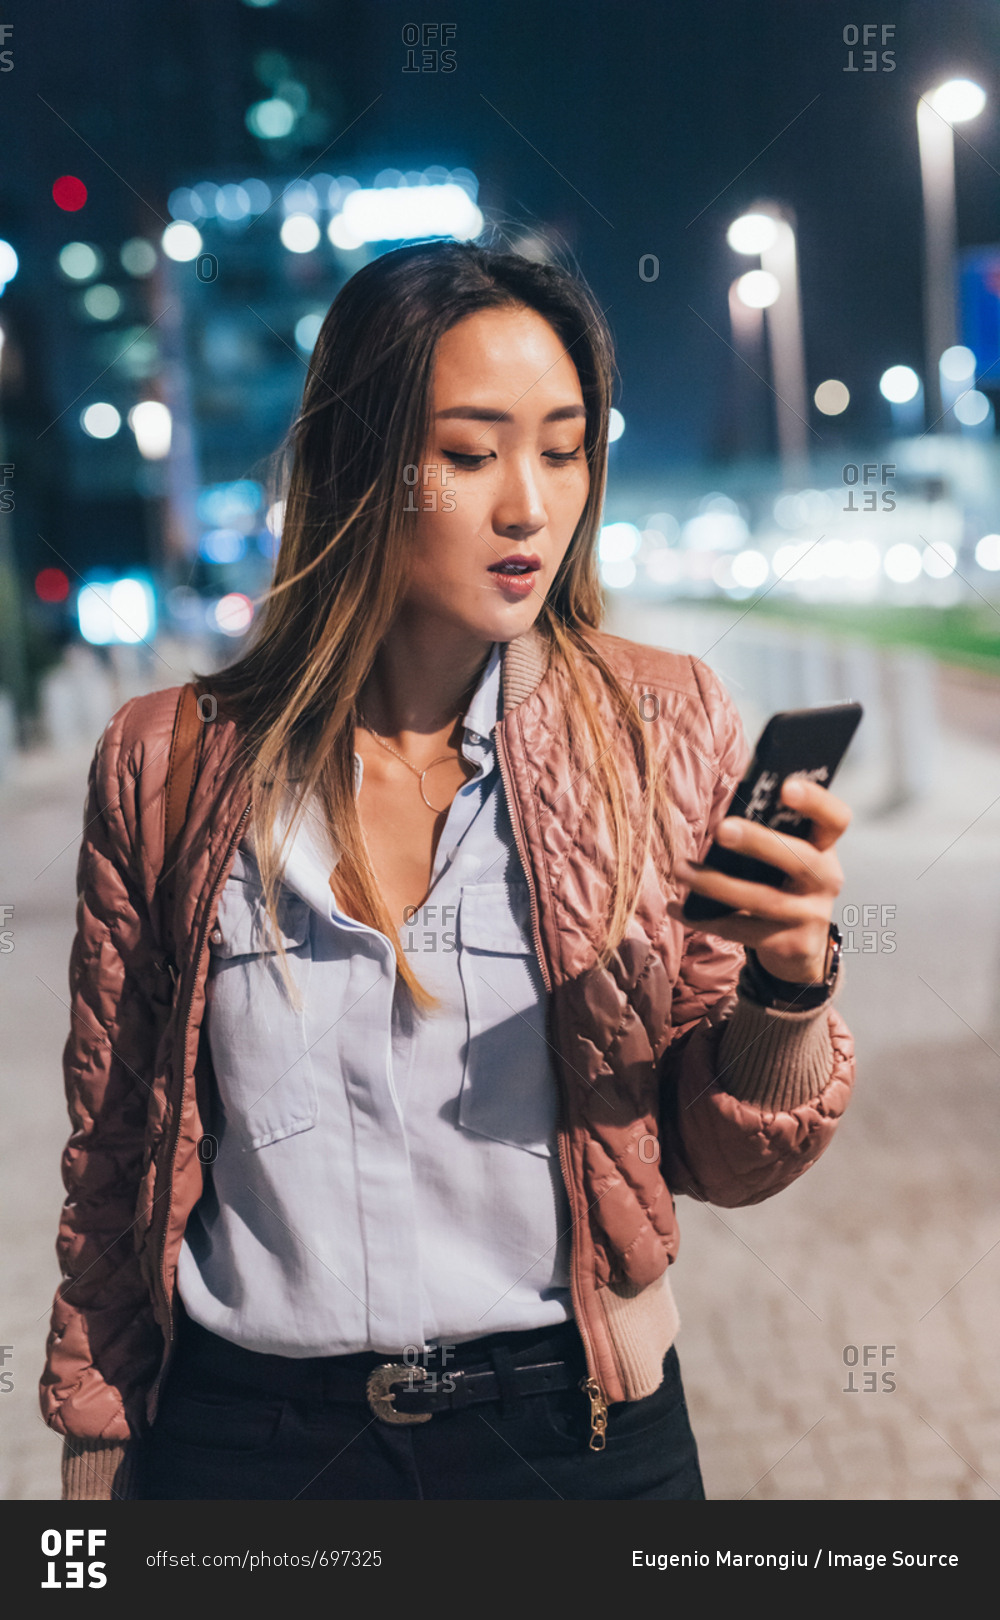 Woman standing outdoors, at night, using smartphone